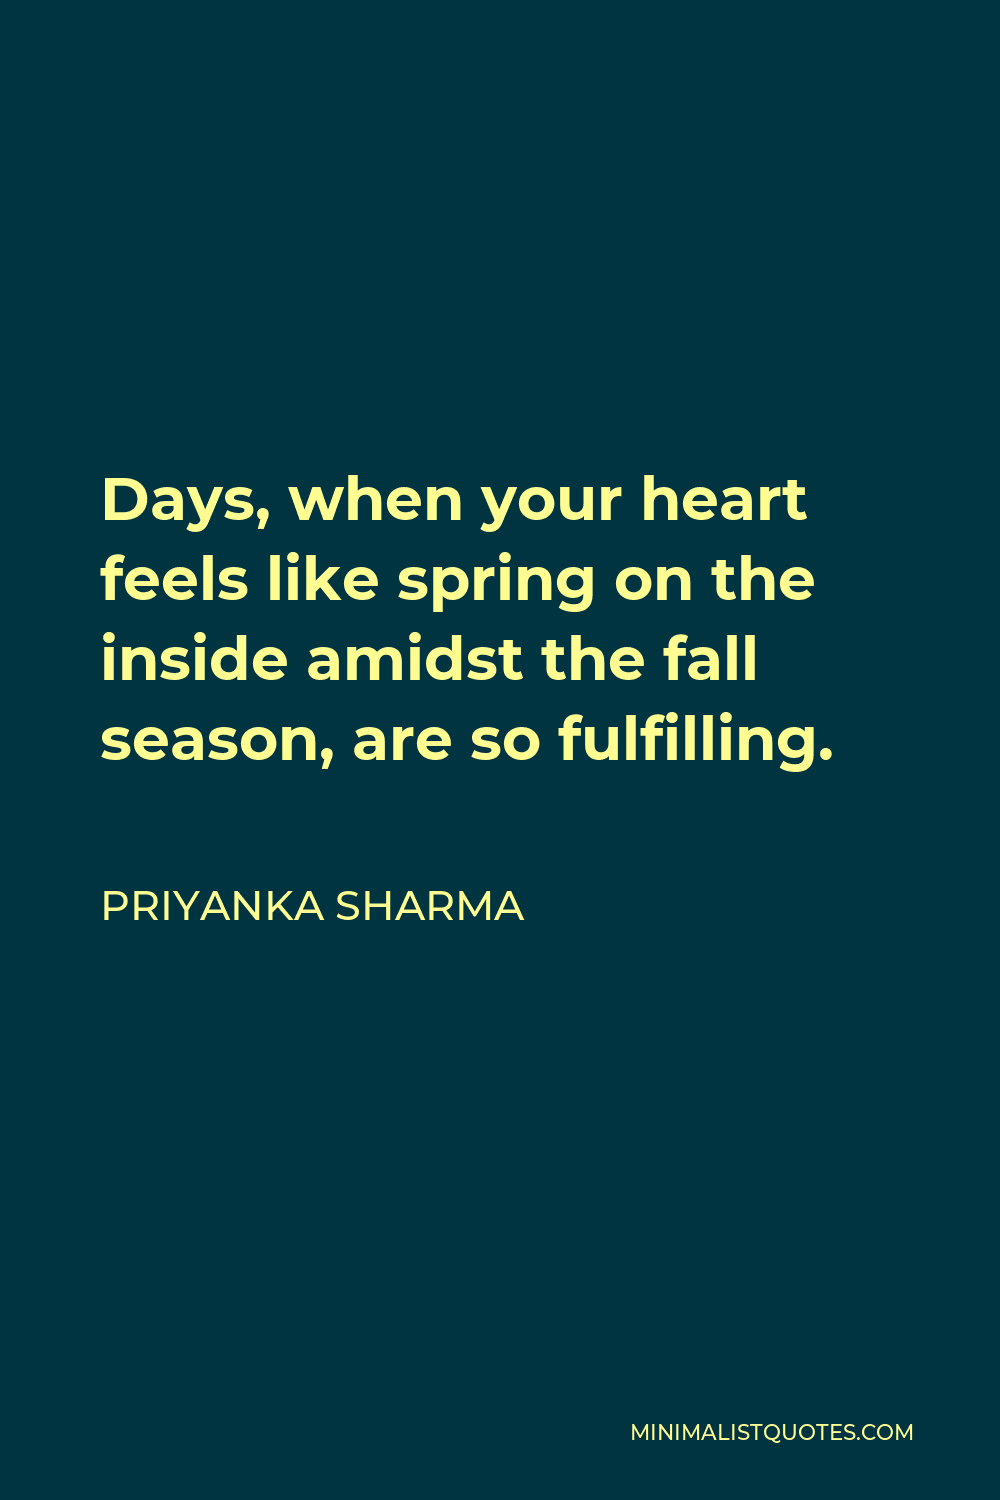 Priyanka Sharma Quote - Days, when your heart feels like spring on the inside amidst the fall season, are so fulfilling.